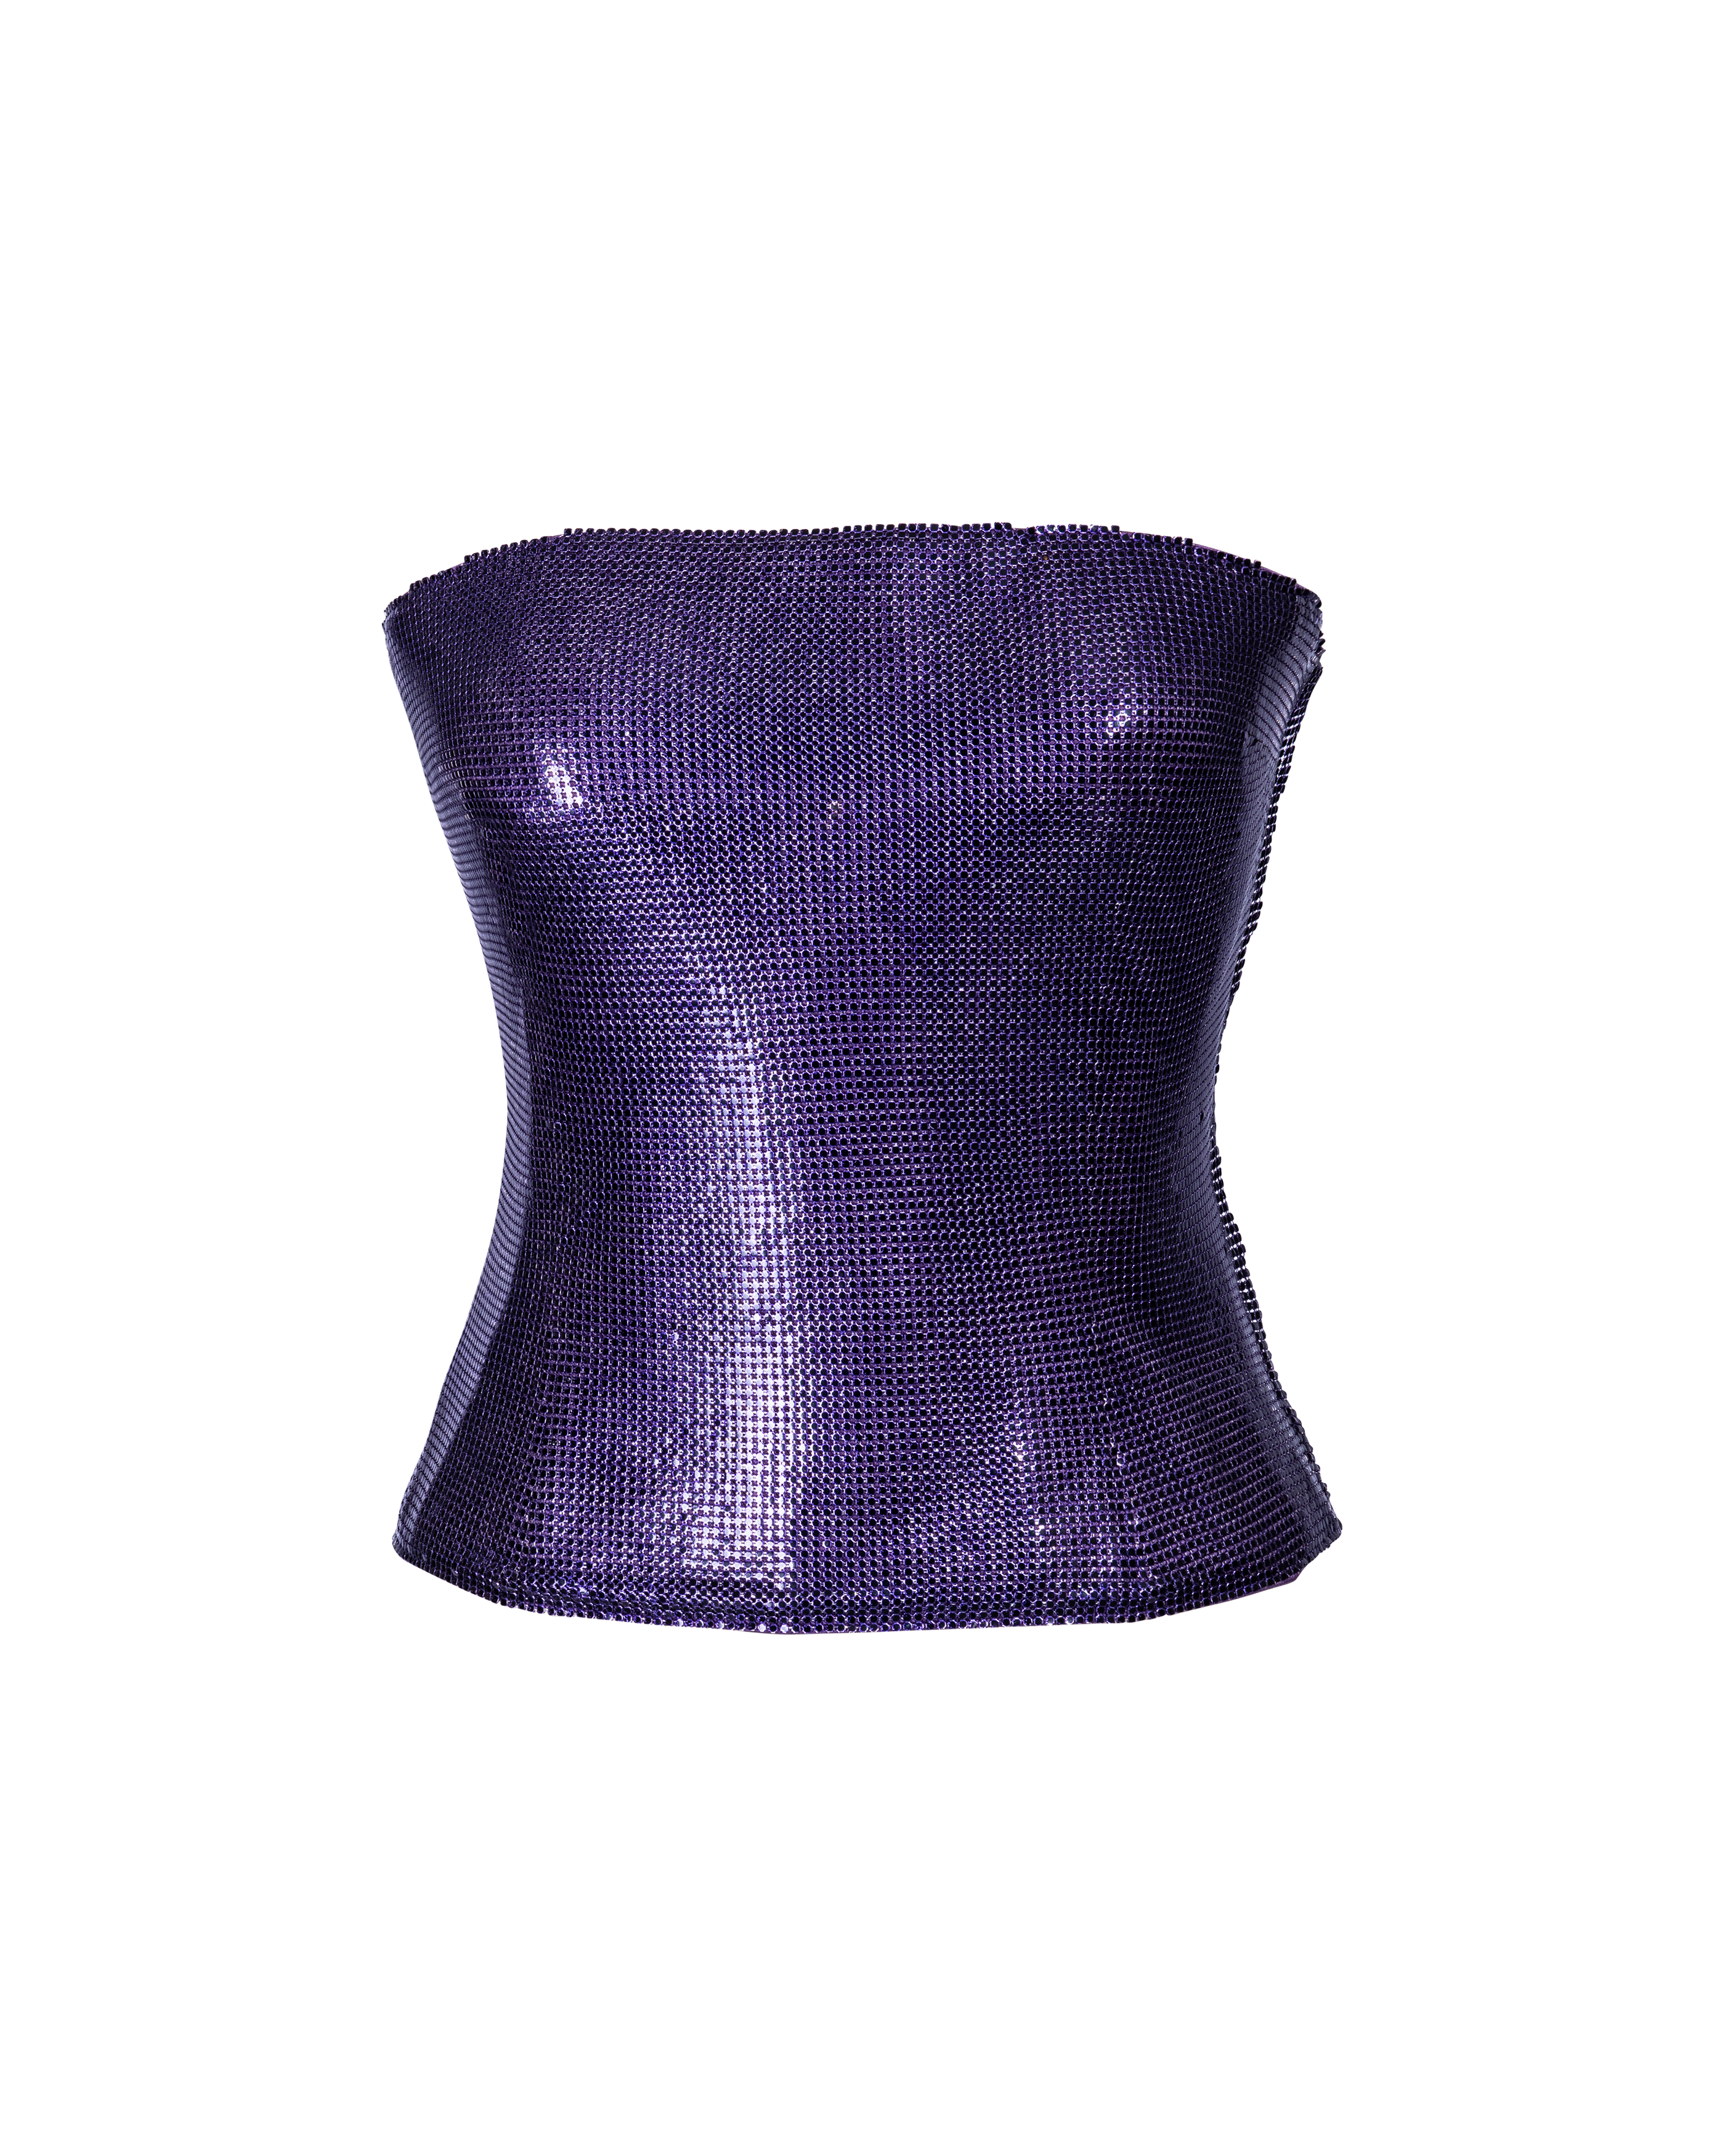 S/S 1998 Purple Strapless Chainmail Top